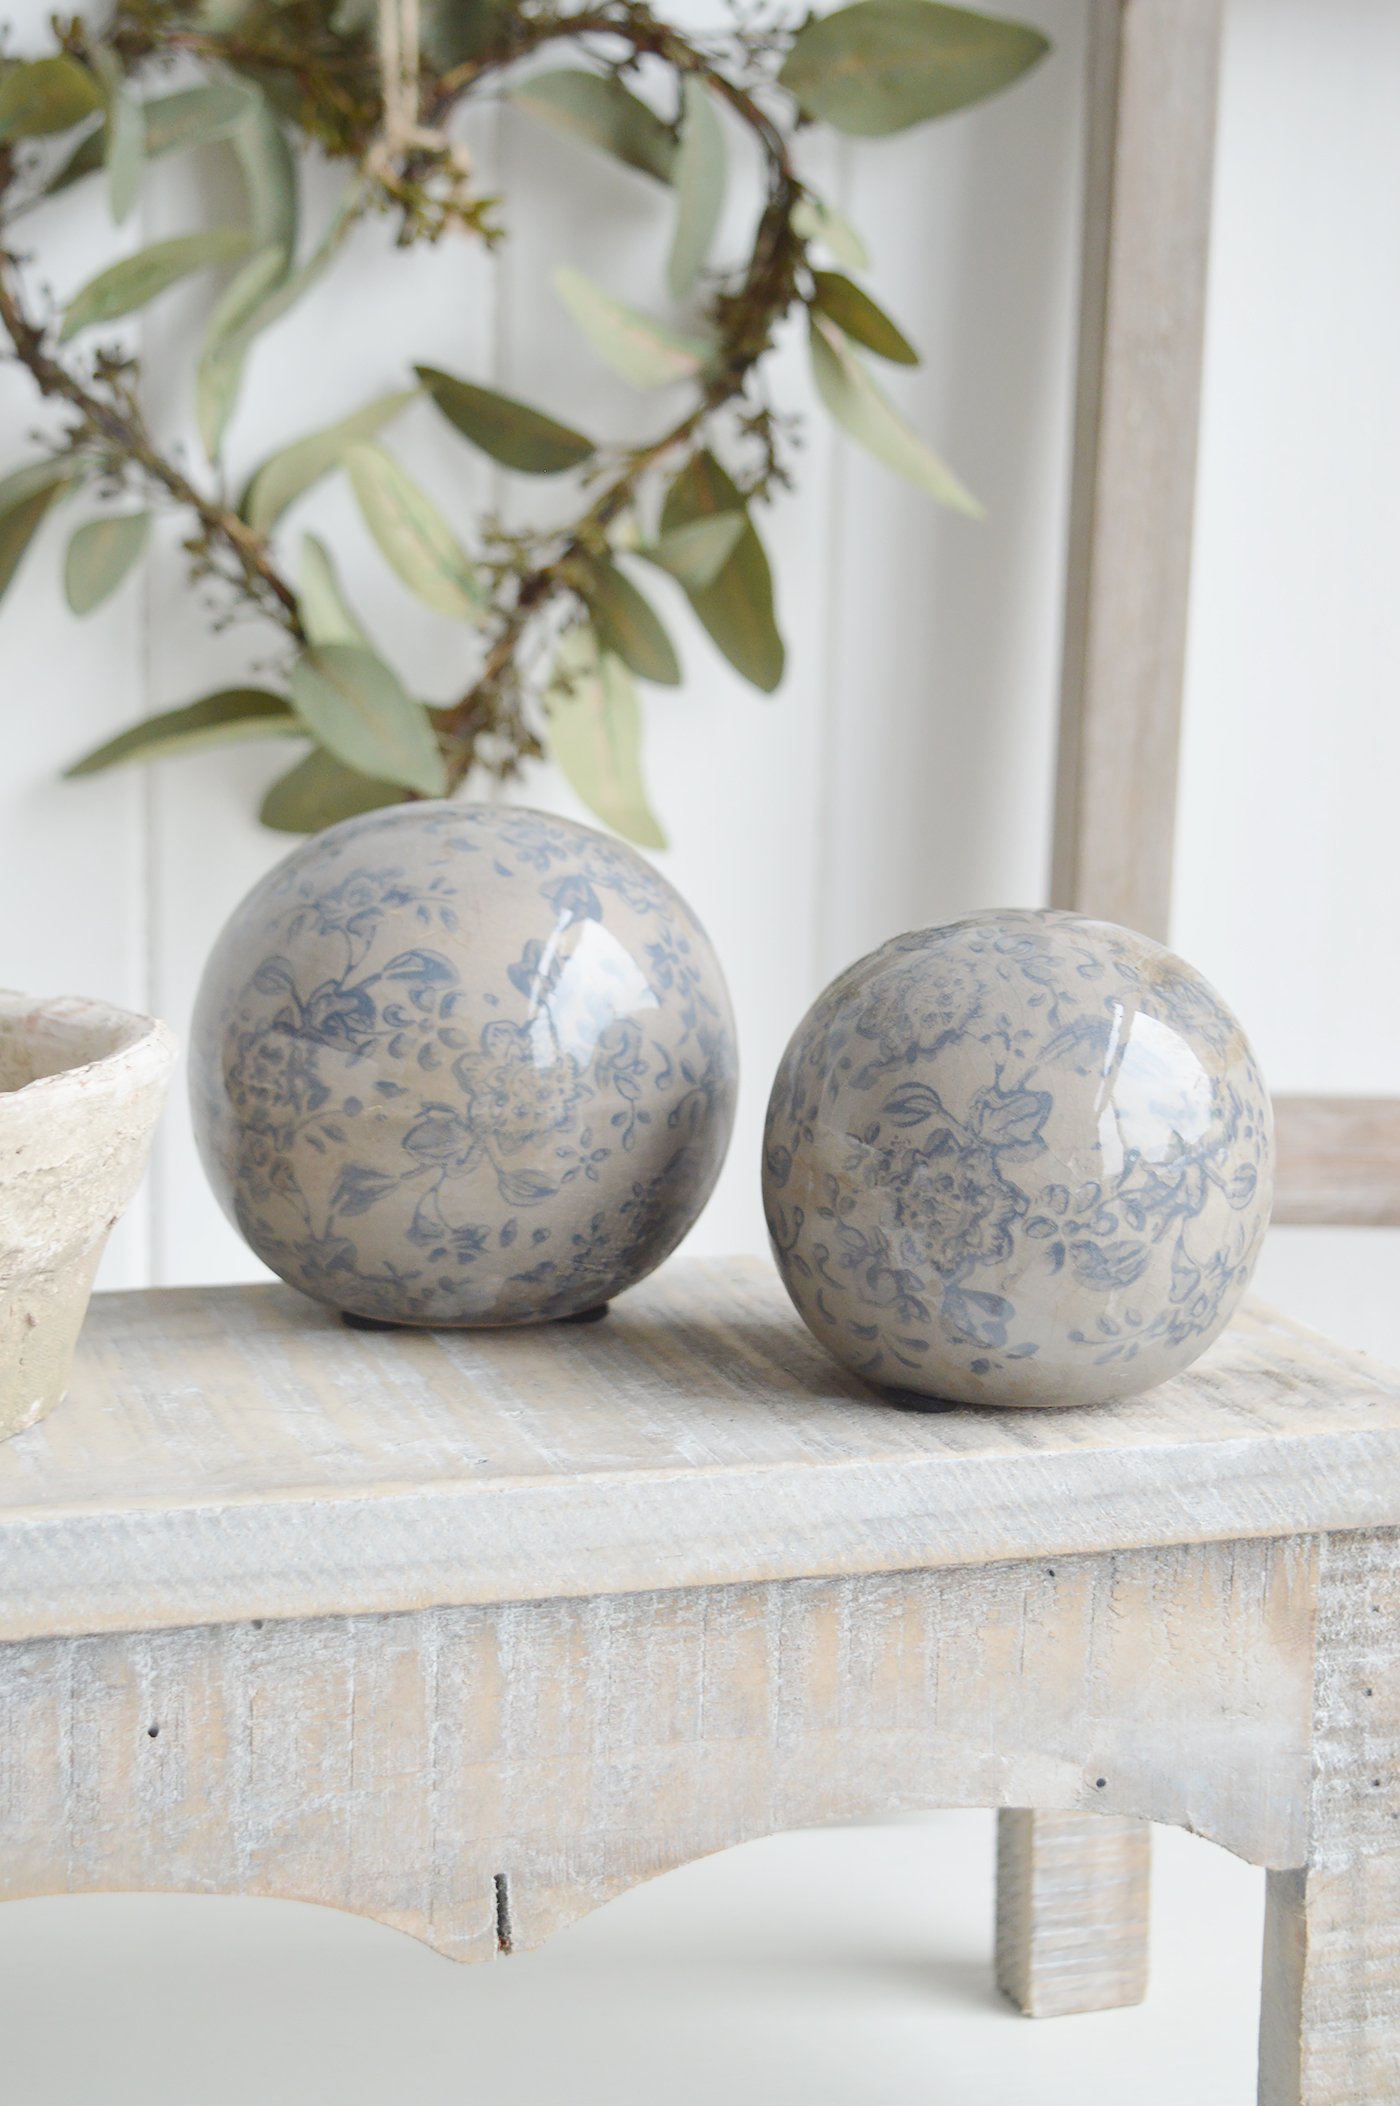 White Furniture and accessories for the home. Buttonwood Ceramic Decorative Balls for New England, modern farmhouse city Country and coastal home interior decor